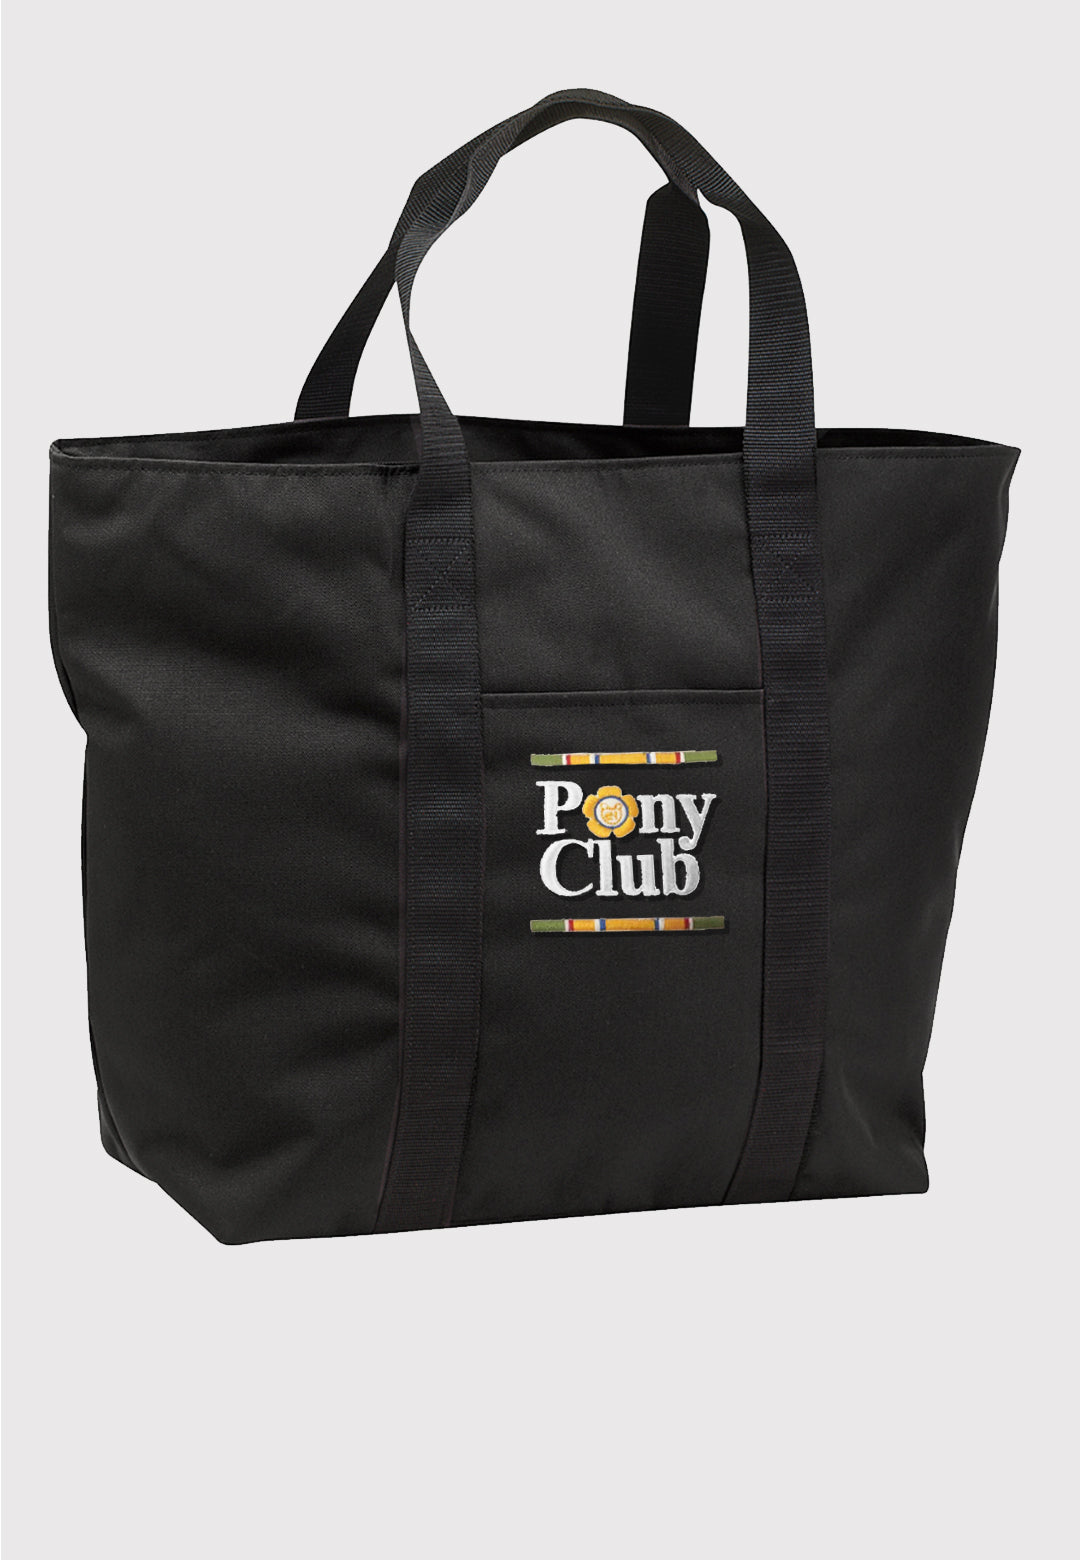 Aiken County Pony Club Port Authority® All-Purpose Tote, 2 Color Options